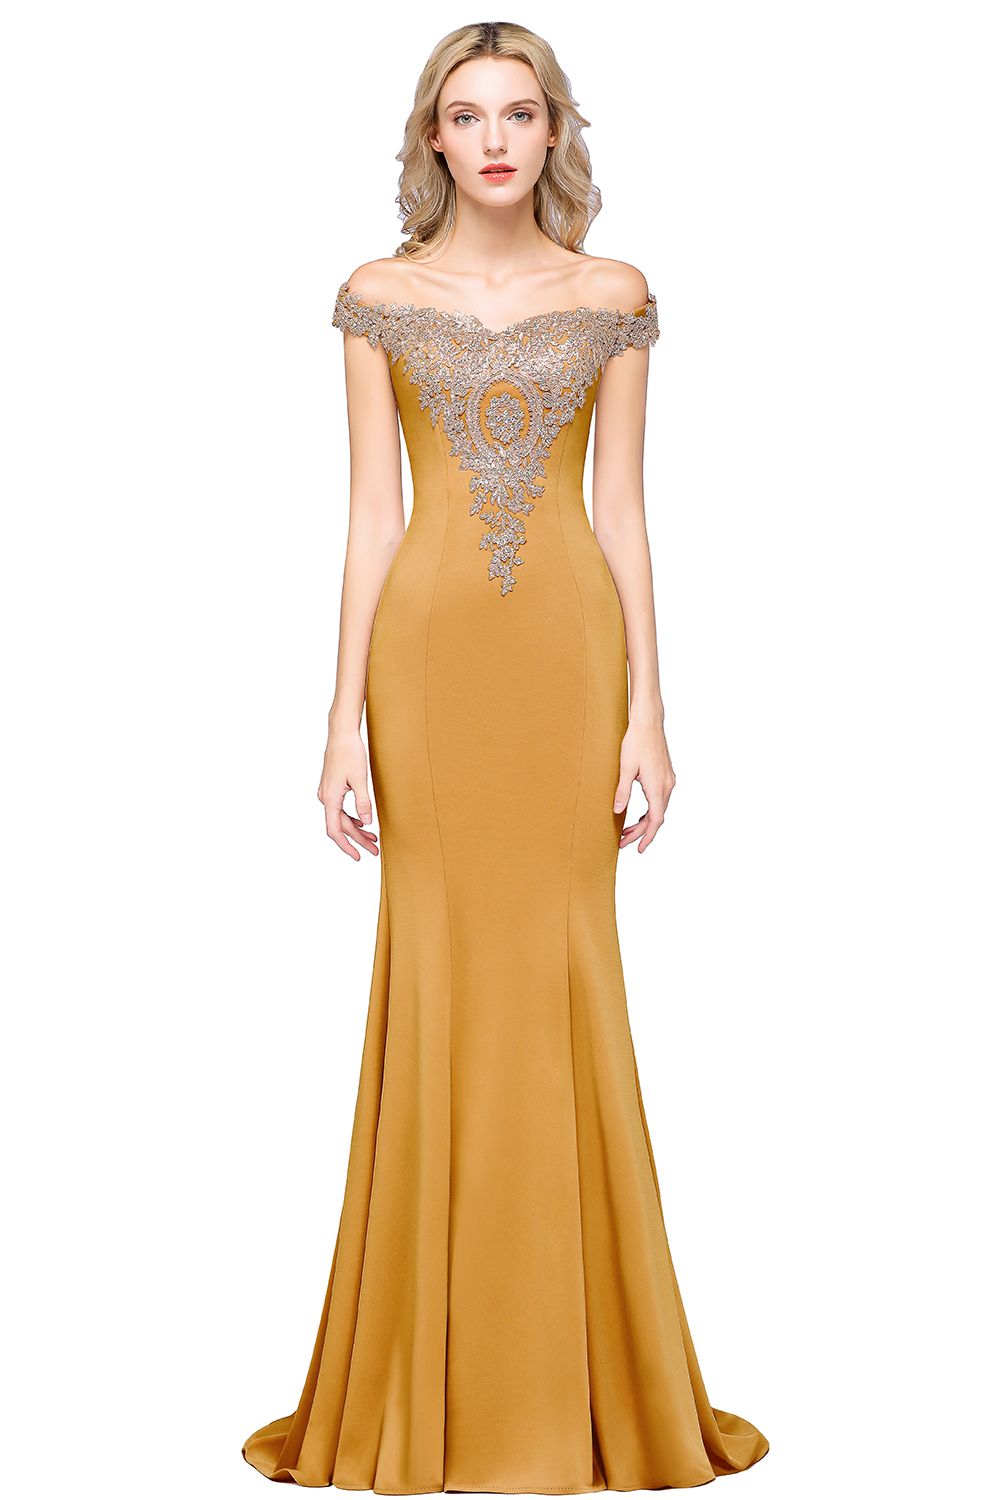 Load image into Gallery viewer, Elegant Long Mermaid Off the Shoulder Bridesmaid Dress-BIZTUNNEL
